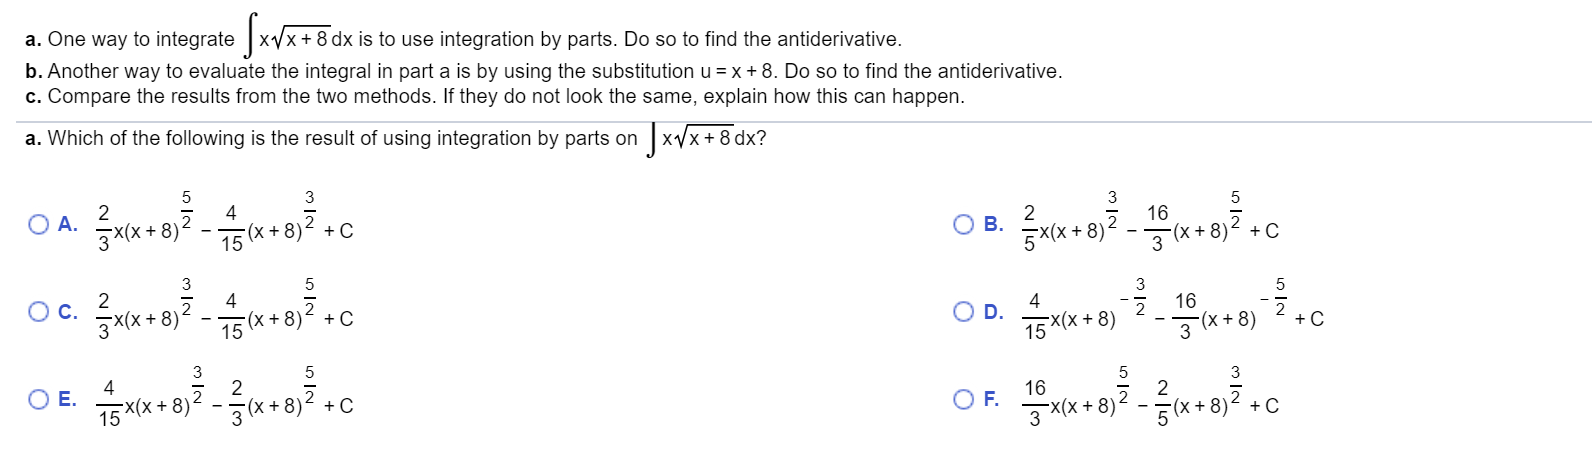 a. One way to integrate xx+8
b.Another way to evaluate the integral in part a is by using the substitution u =x 8. Do so to find the antiderivative
c. Compare the results from the two methods. If they do not look the same, explain how this can happen.
dx is to use integration by parts. Do so to find the antiderivative
JxVx+8 dx?
a. Which of the following is the result of using integration by parts on
3
2
OA.
3*(x+8)2
4
3
16
(x + 8)
5
2
Ов.
5X(X + 8)
(X+ 8
15
C
+ C
5
4
5
Ос.
8
16
(x+8)
15
C
O D.
15X(X+8)
+C
3 x+8)
3
2
5
5
2
(X8) C
E.
75X(X8)
15
16
C
O F.
3x(X+ 8)
3(X8)
